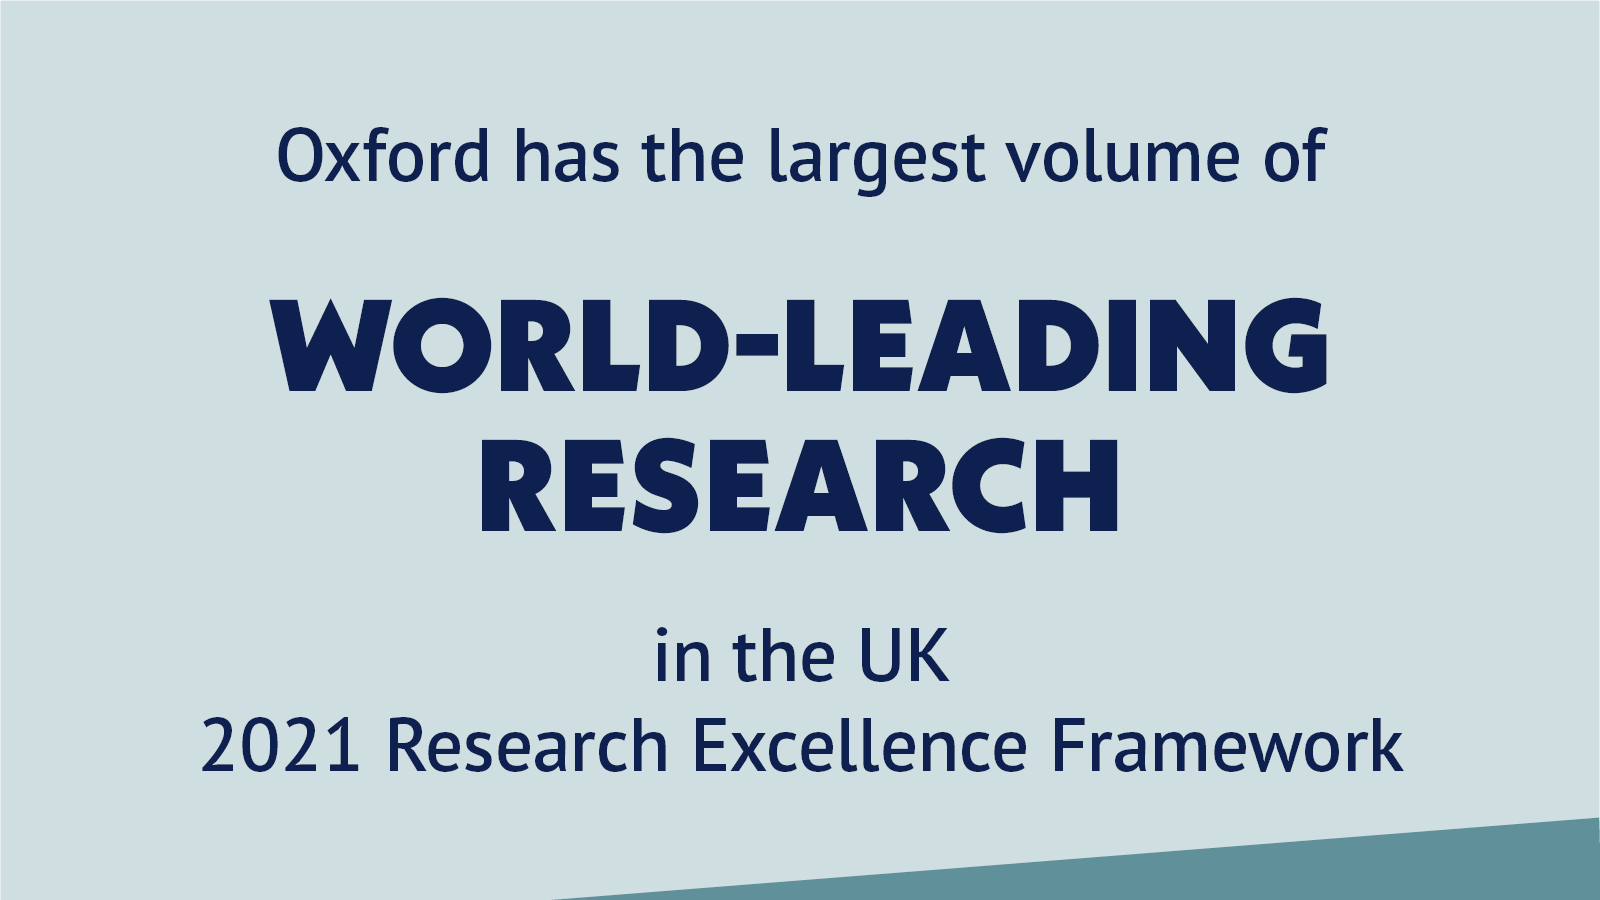 Oxford has the largest volume of world-leading research in the UK 2021 Research Excellence Framework